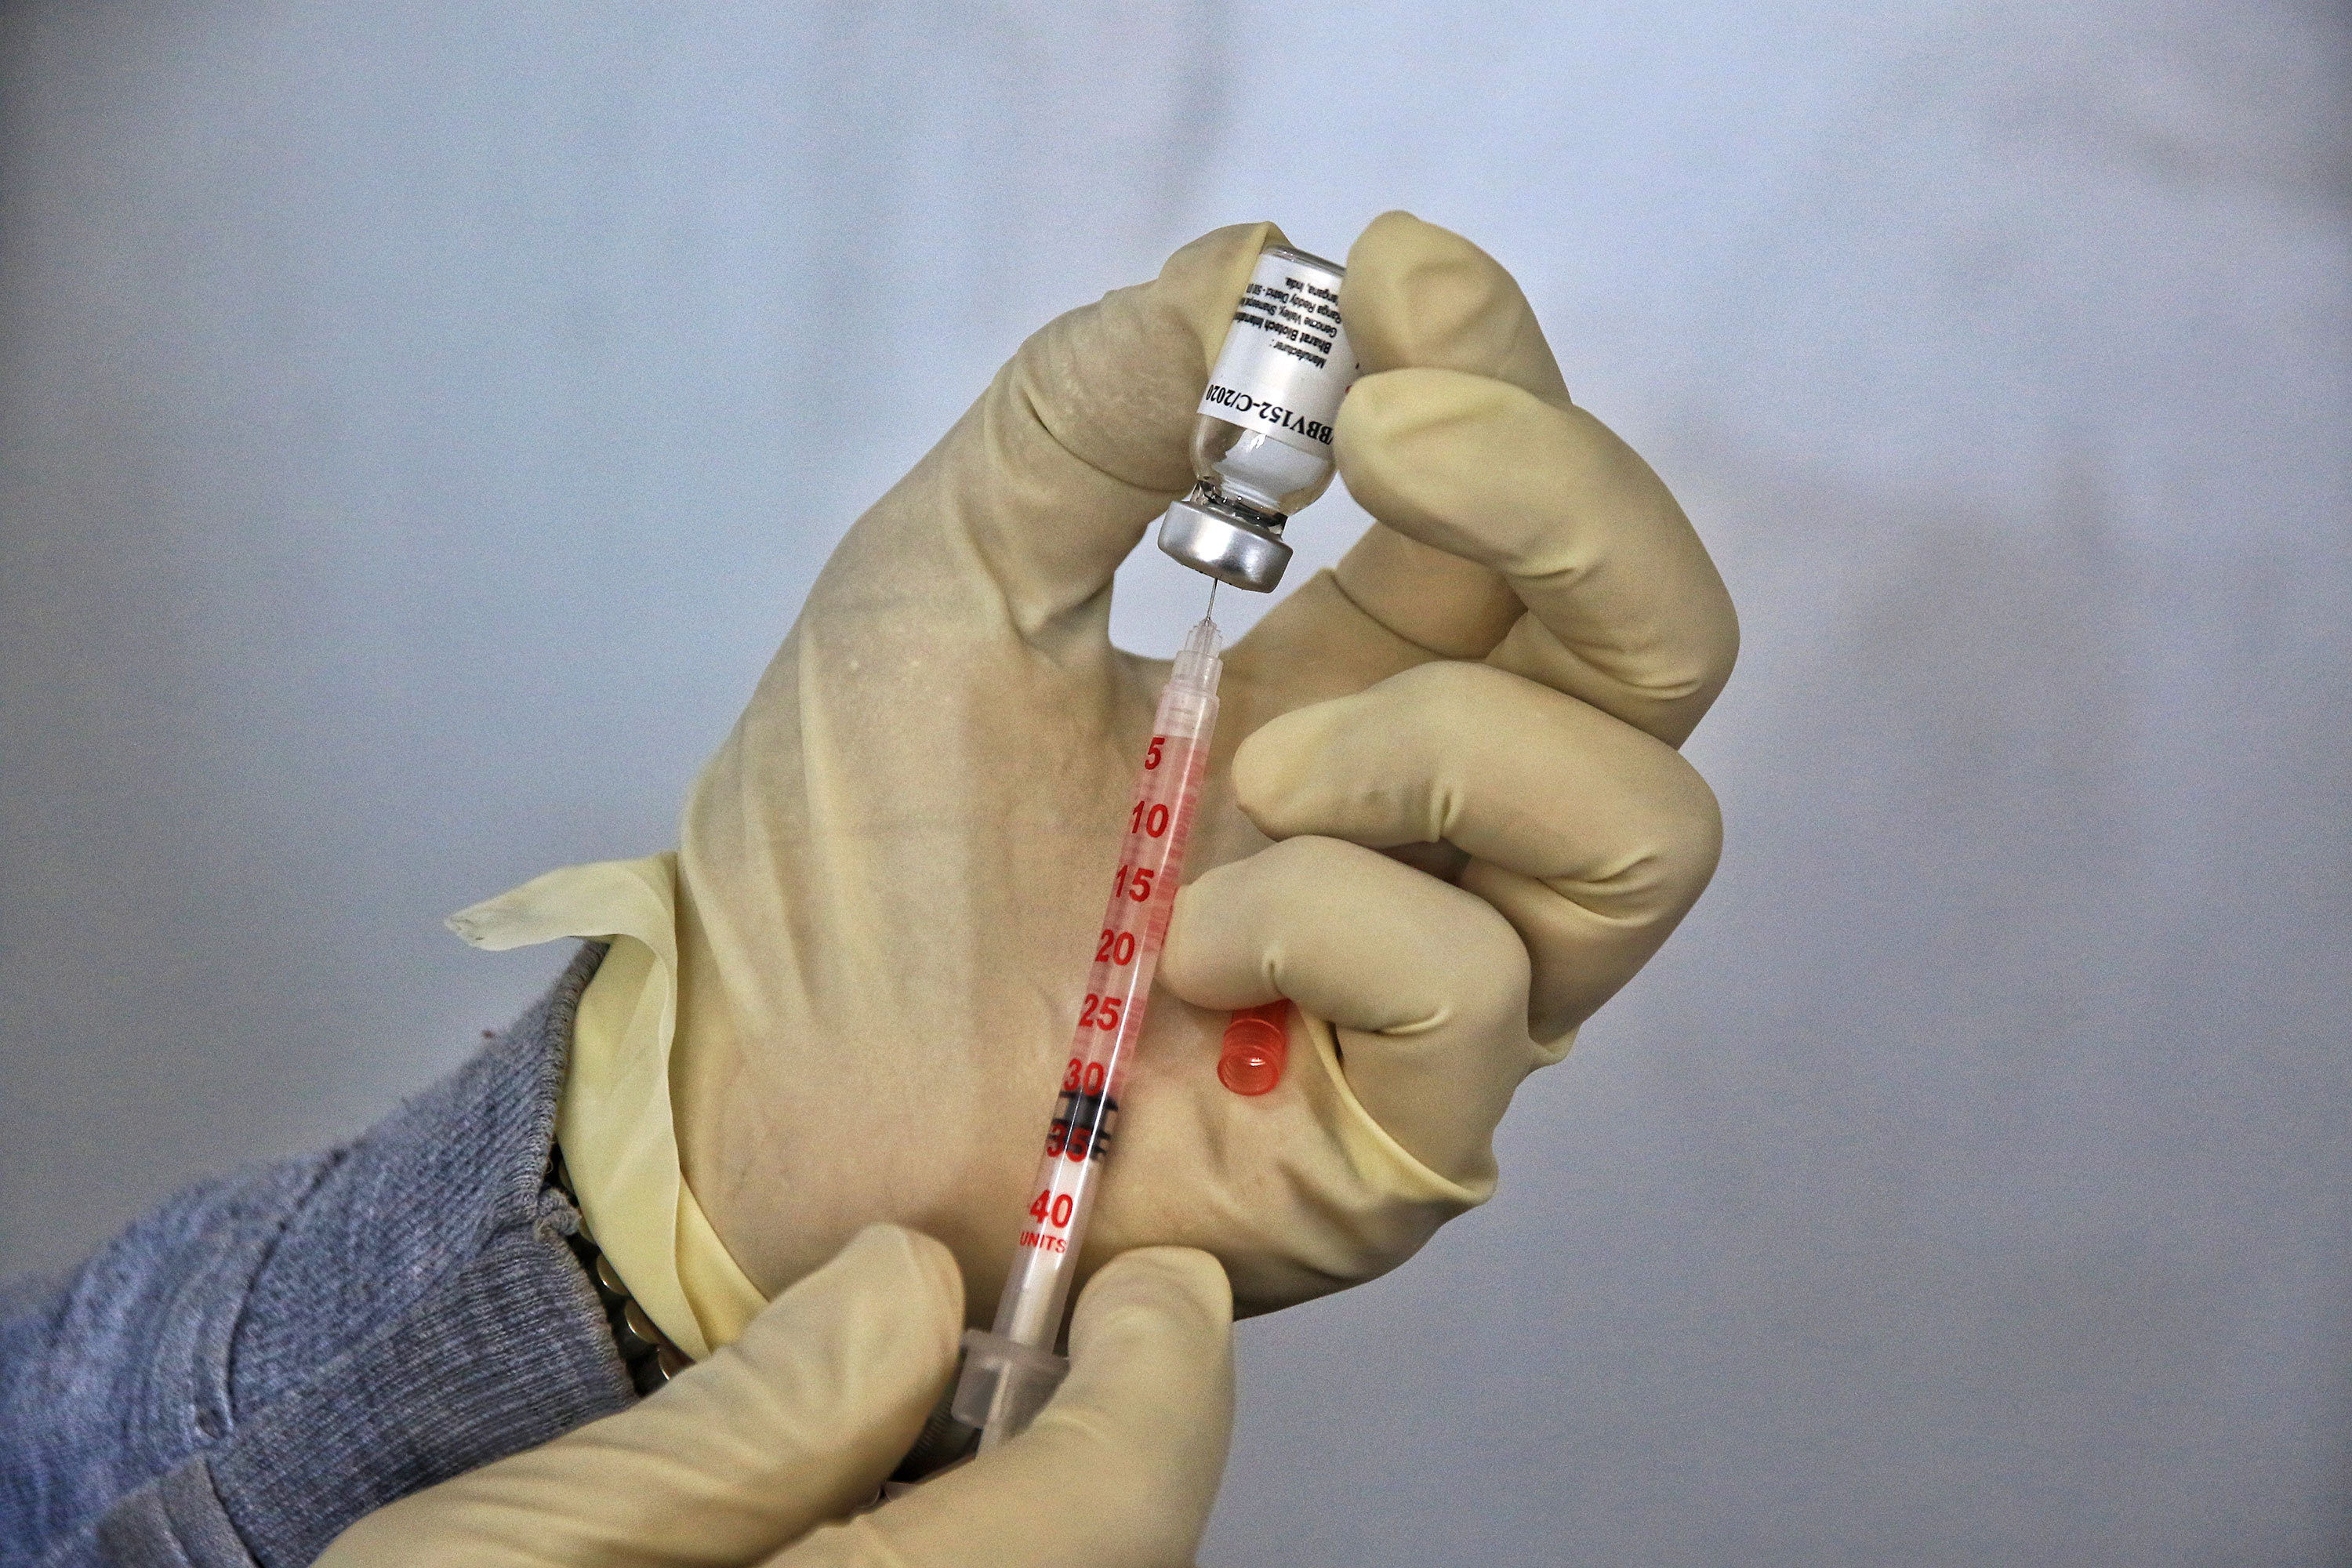 A health worker fills a syringe with the Covaxin Covid-19 vaccine at Maharaja Agrasen Super Speciality Hospital in Jaipur, India, on December 18.